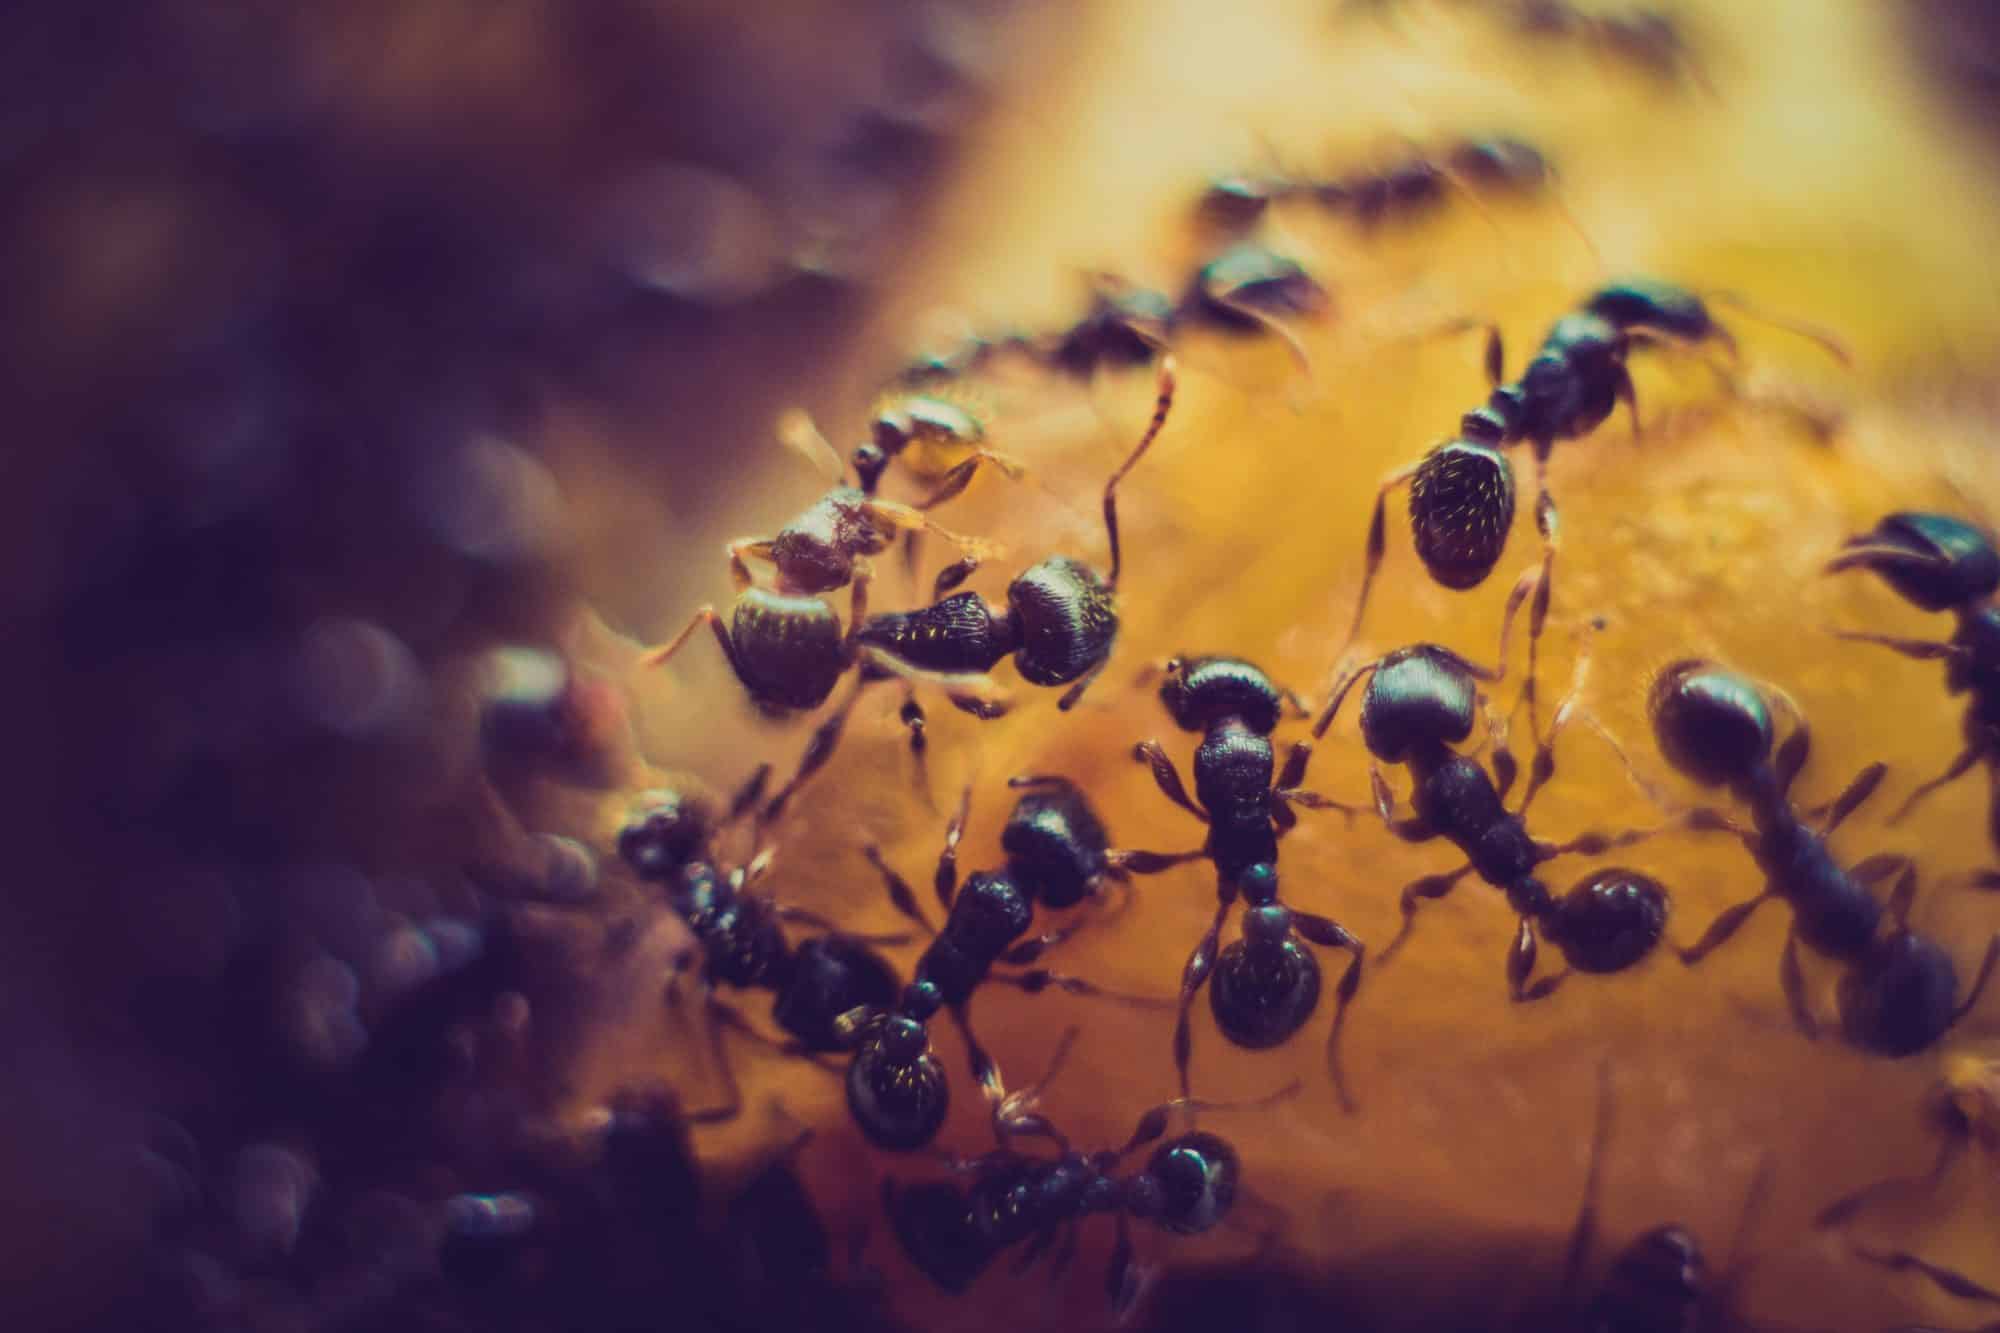 Photo of ants from Unsplash